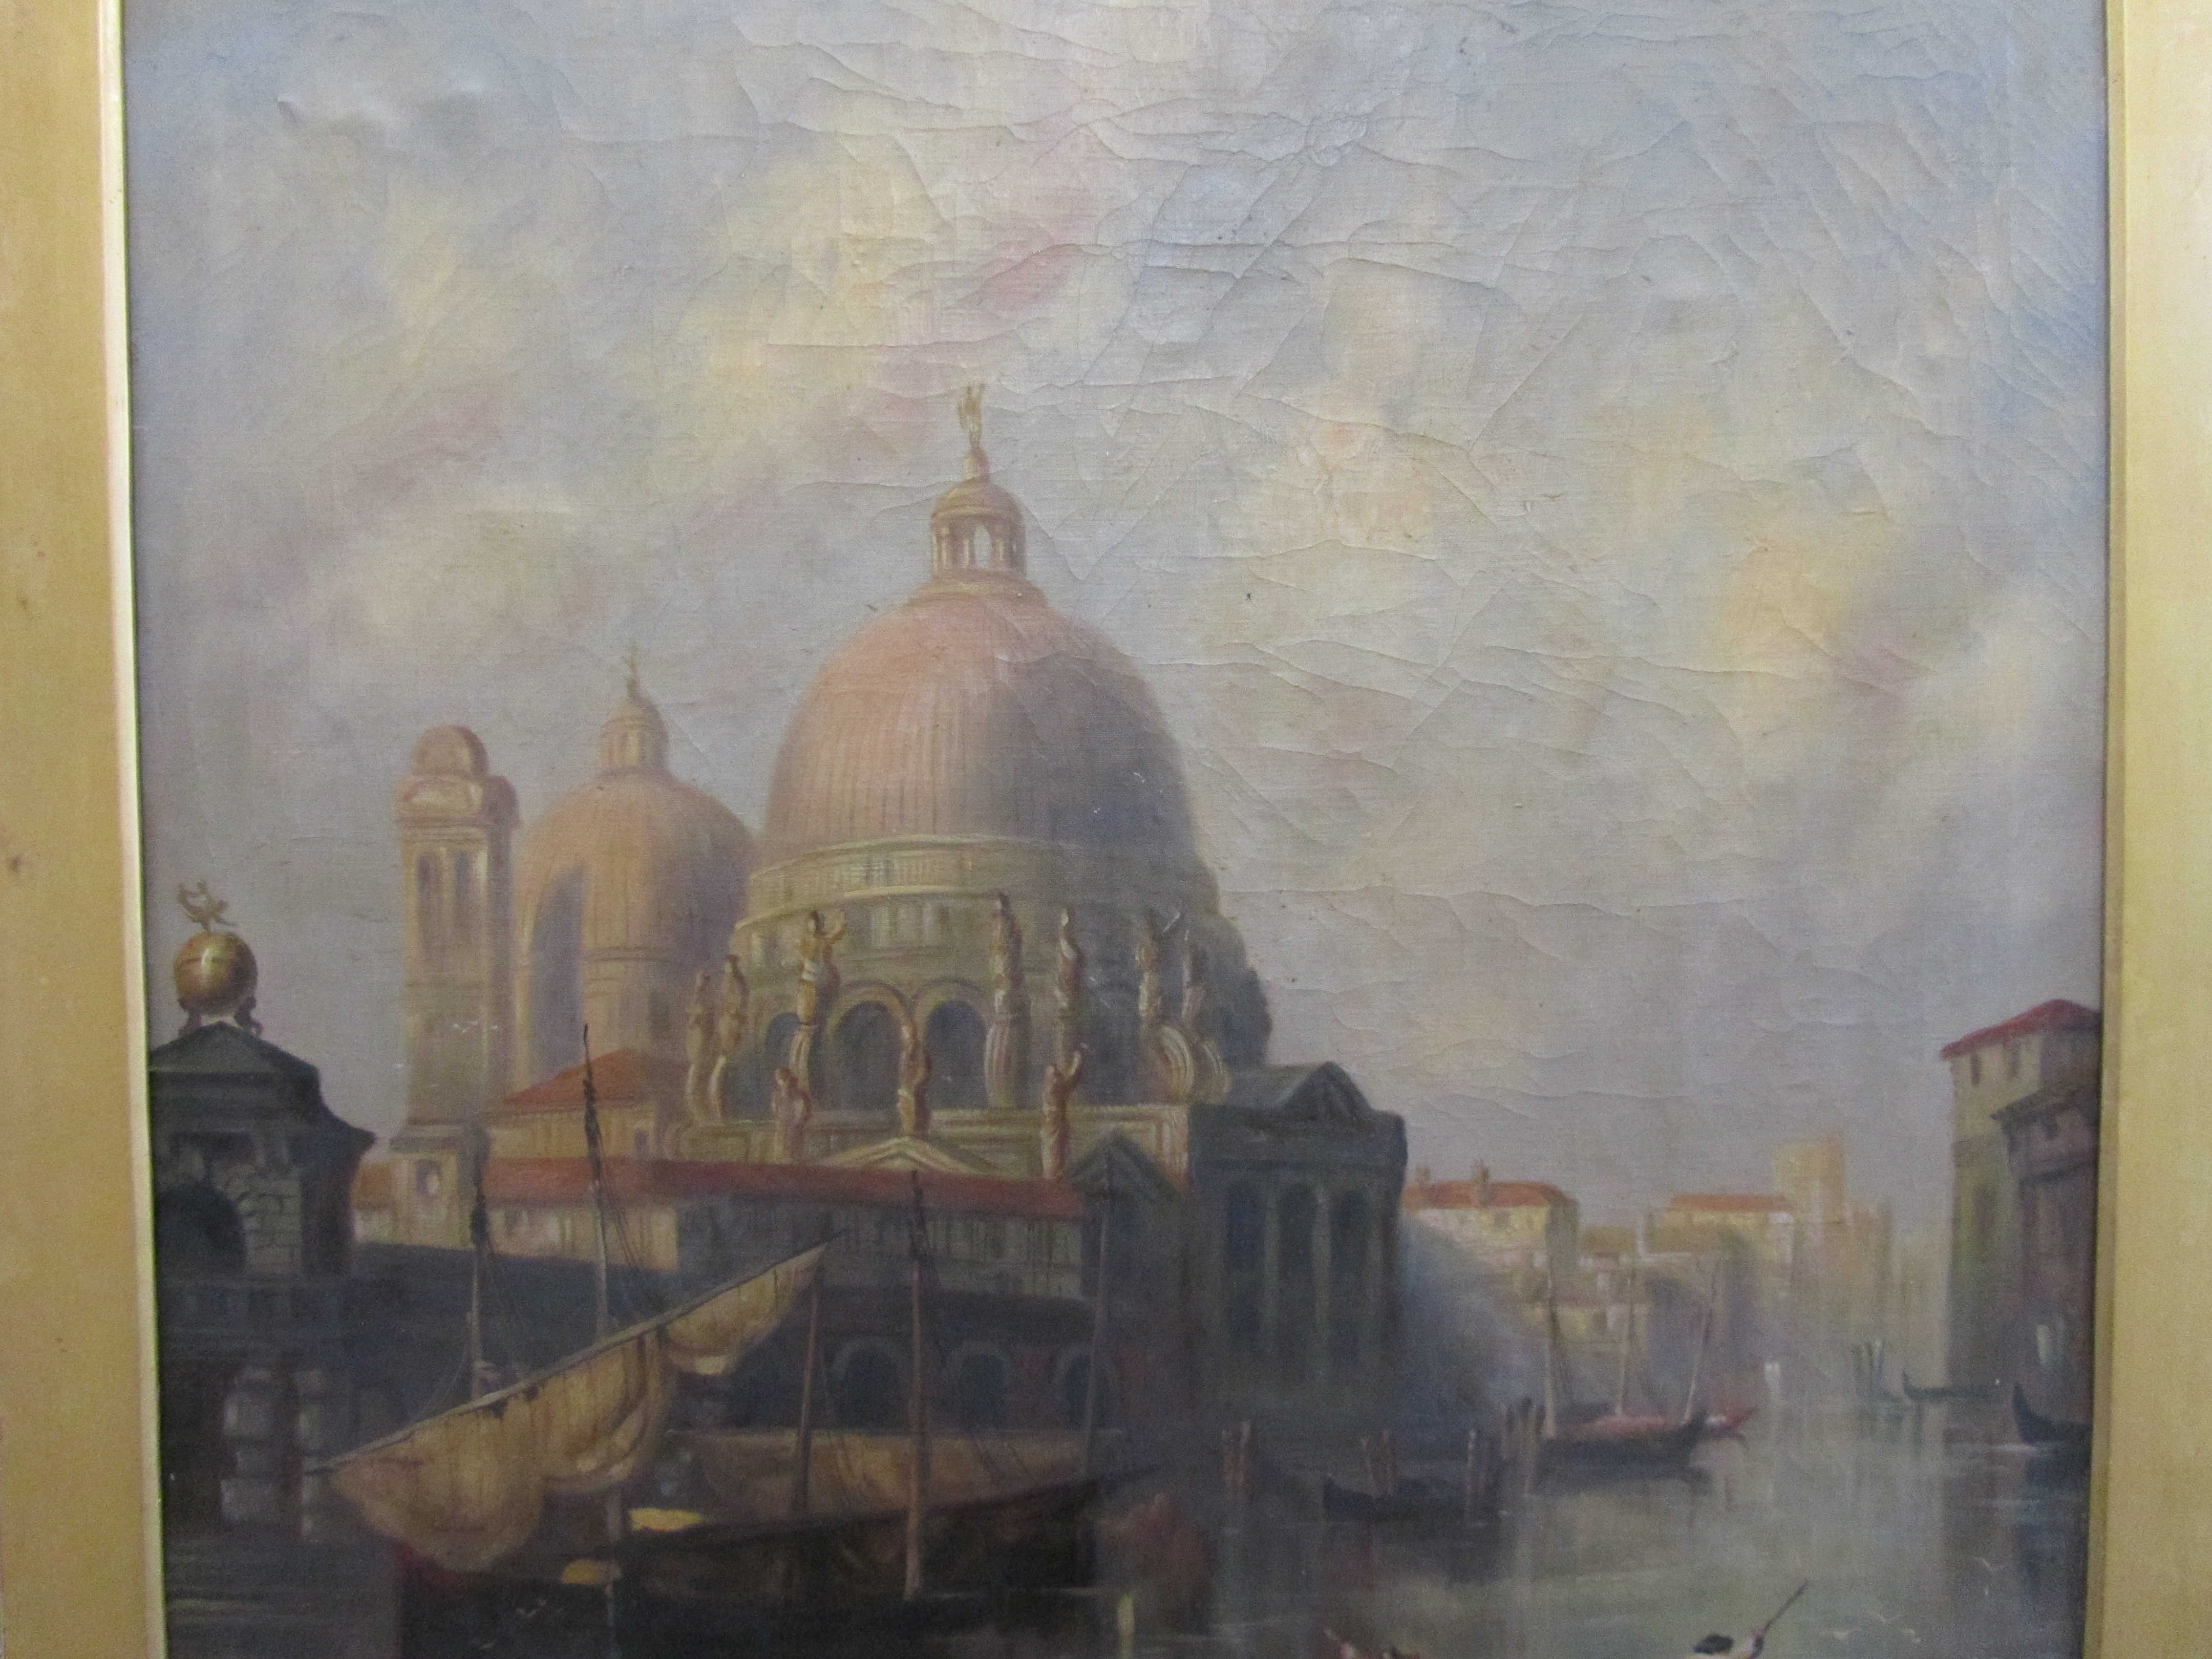 Venetian School, 19th century 'Gondola's on the canal' oil on canvas - Image 6 of 18